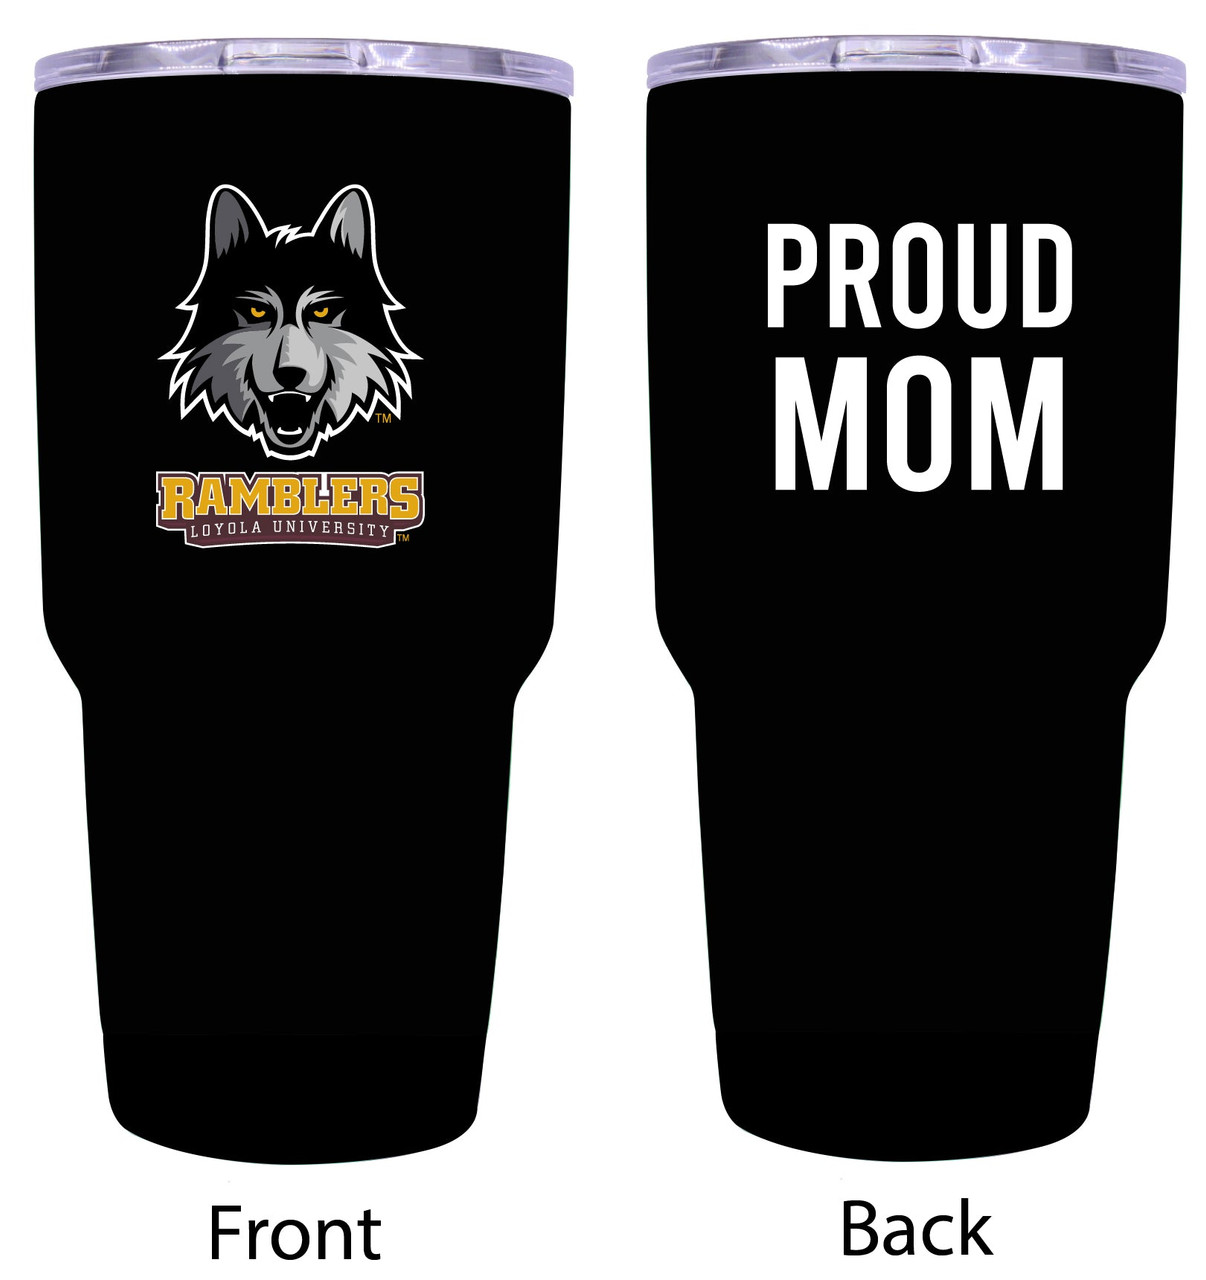 Loyola University Ramblers Proud Mom 24 oz Insulated Stainless Steel Tumblers Choose Your Color.